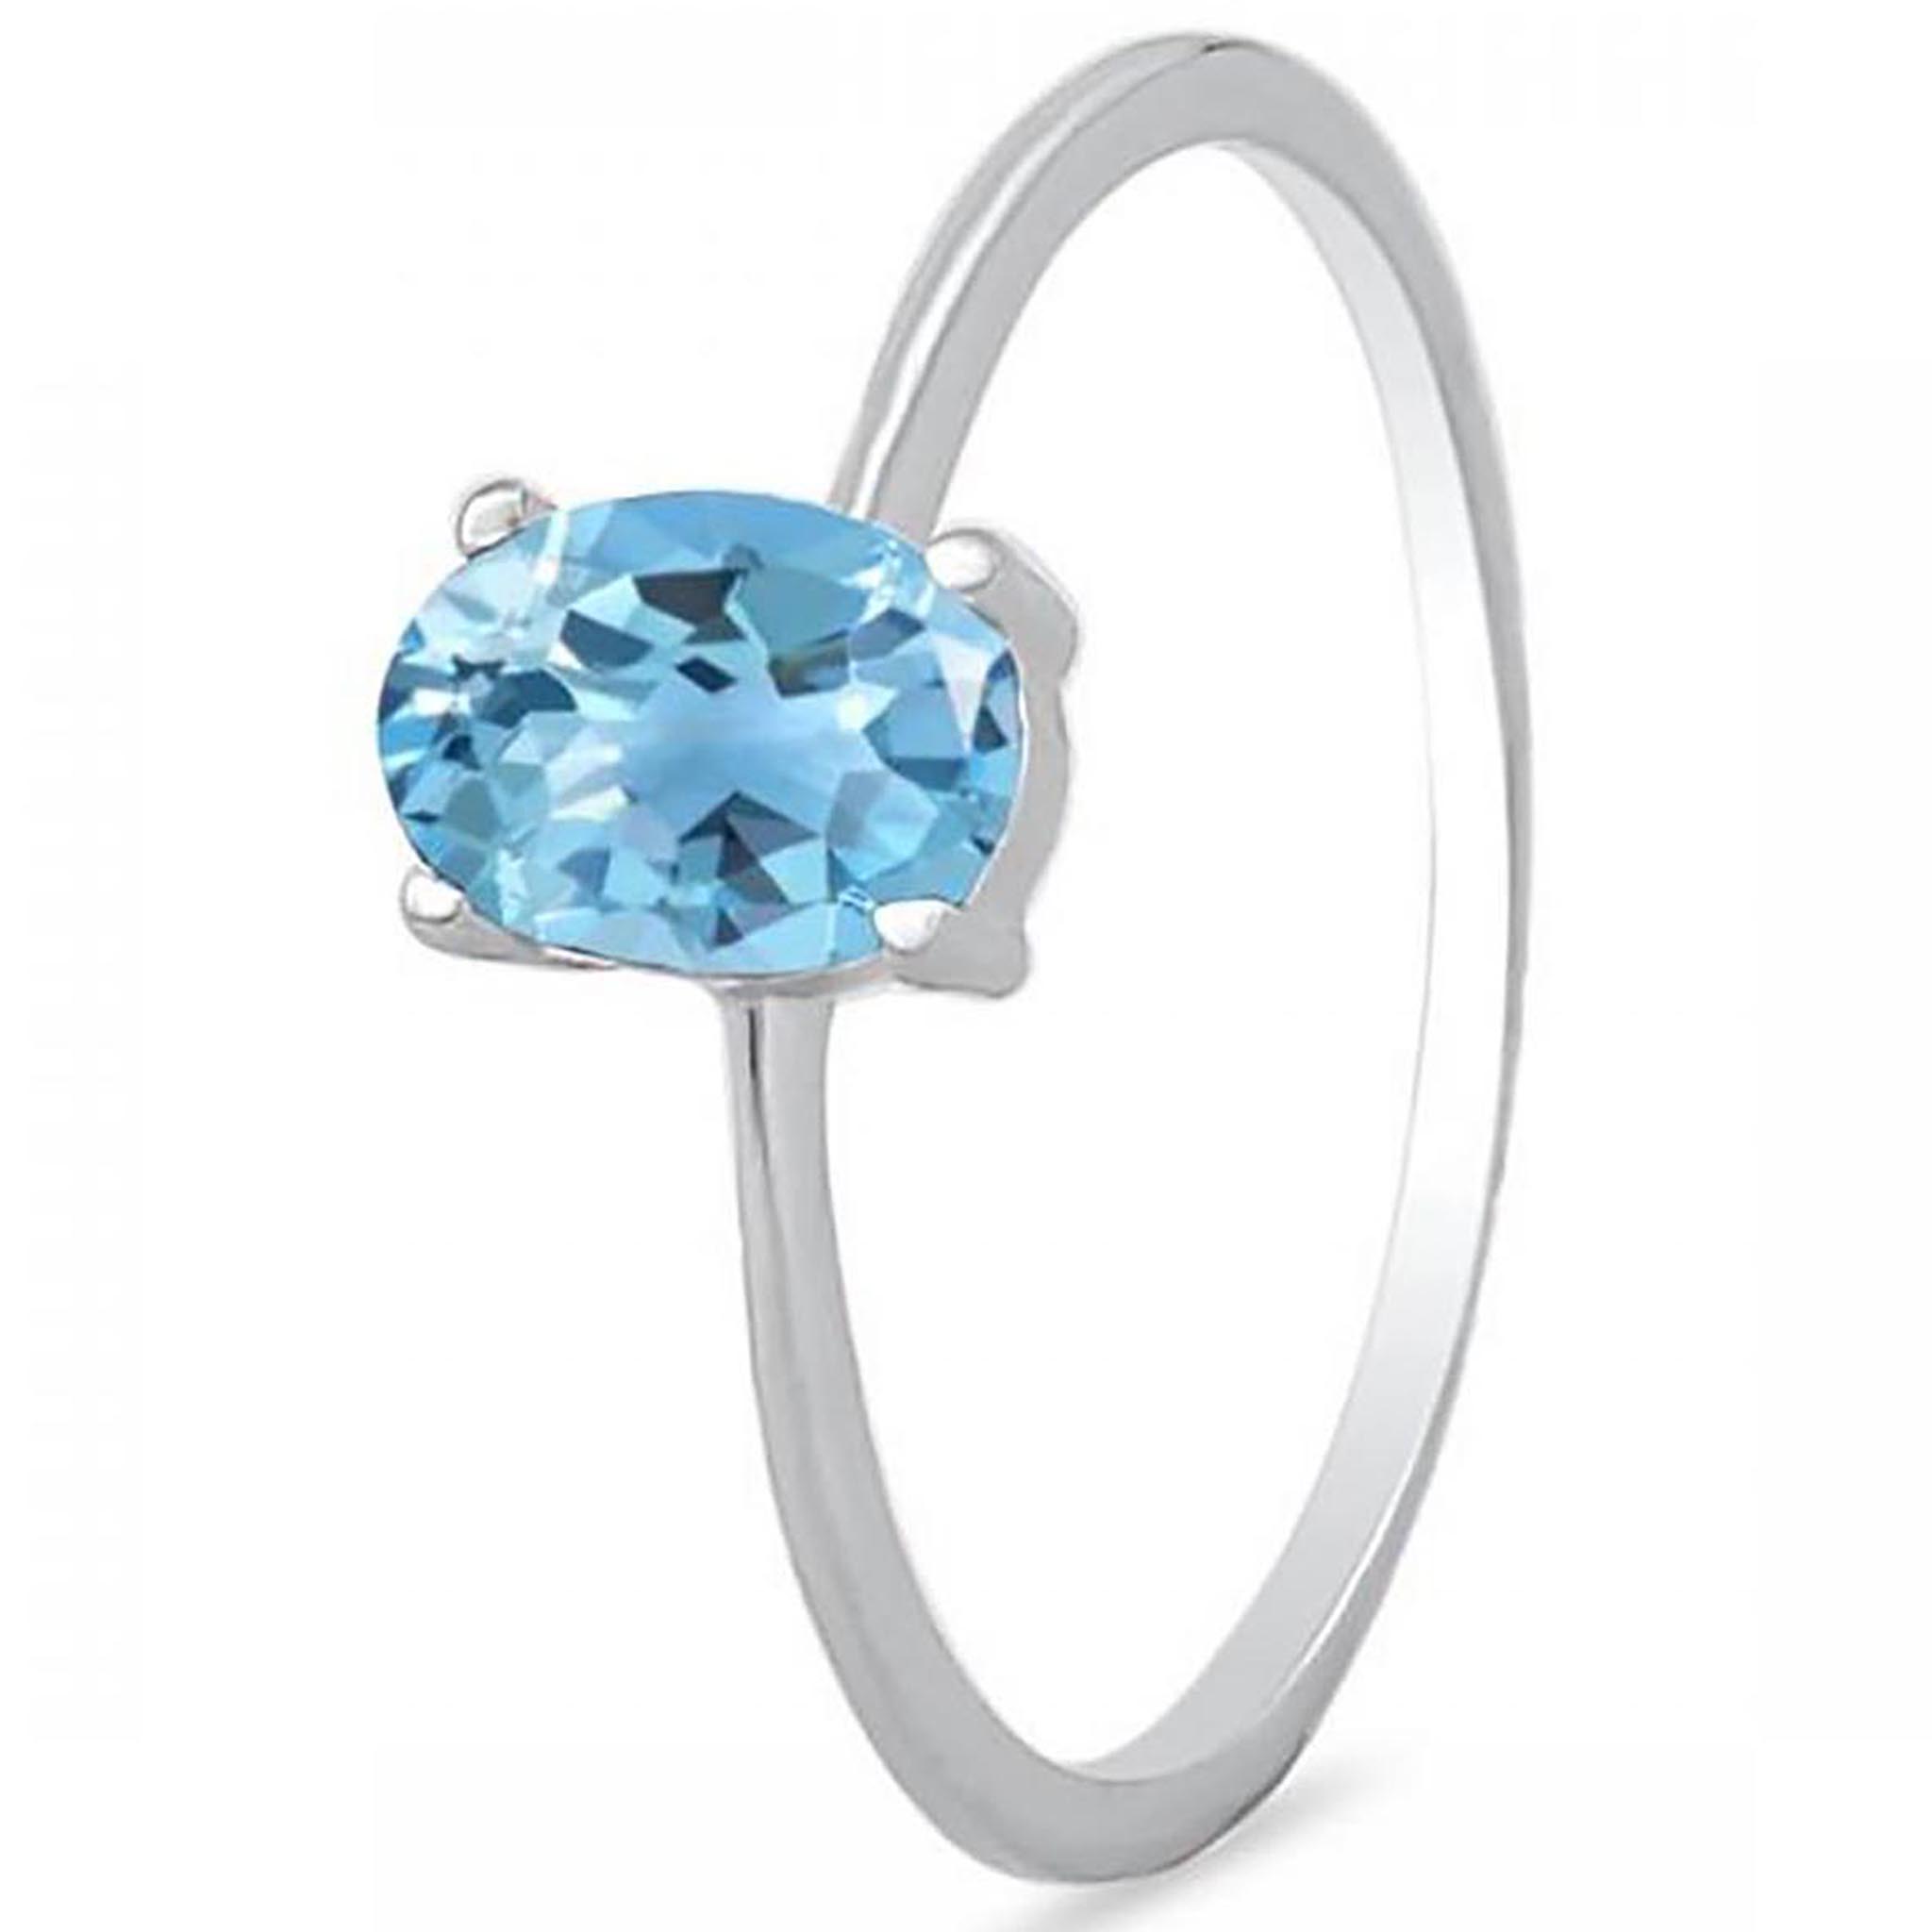 Faceted Oval Blue Topaz Ring